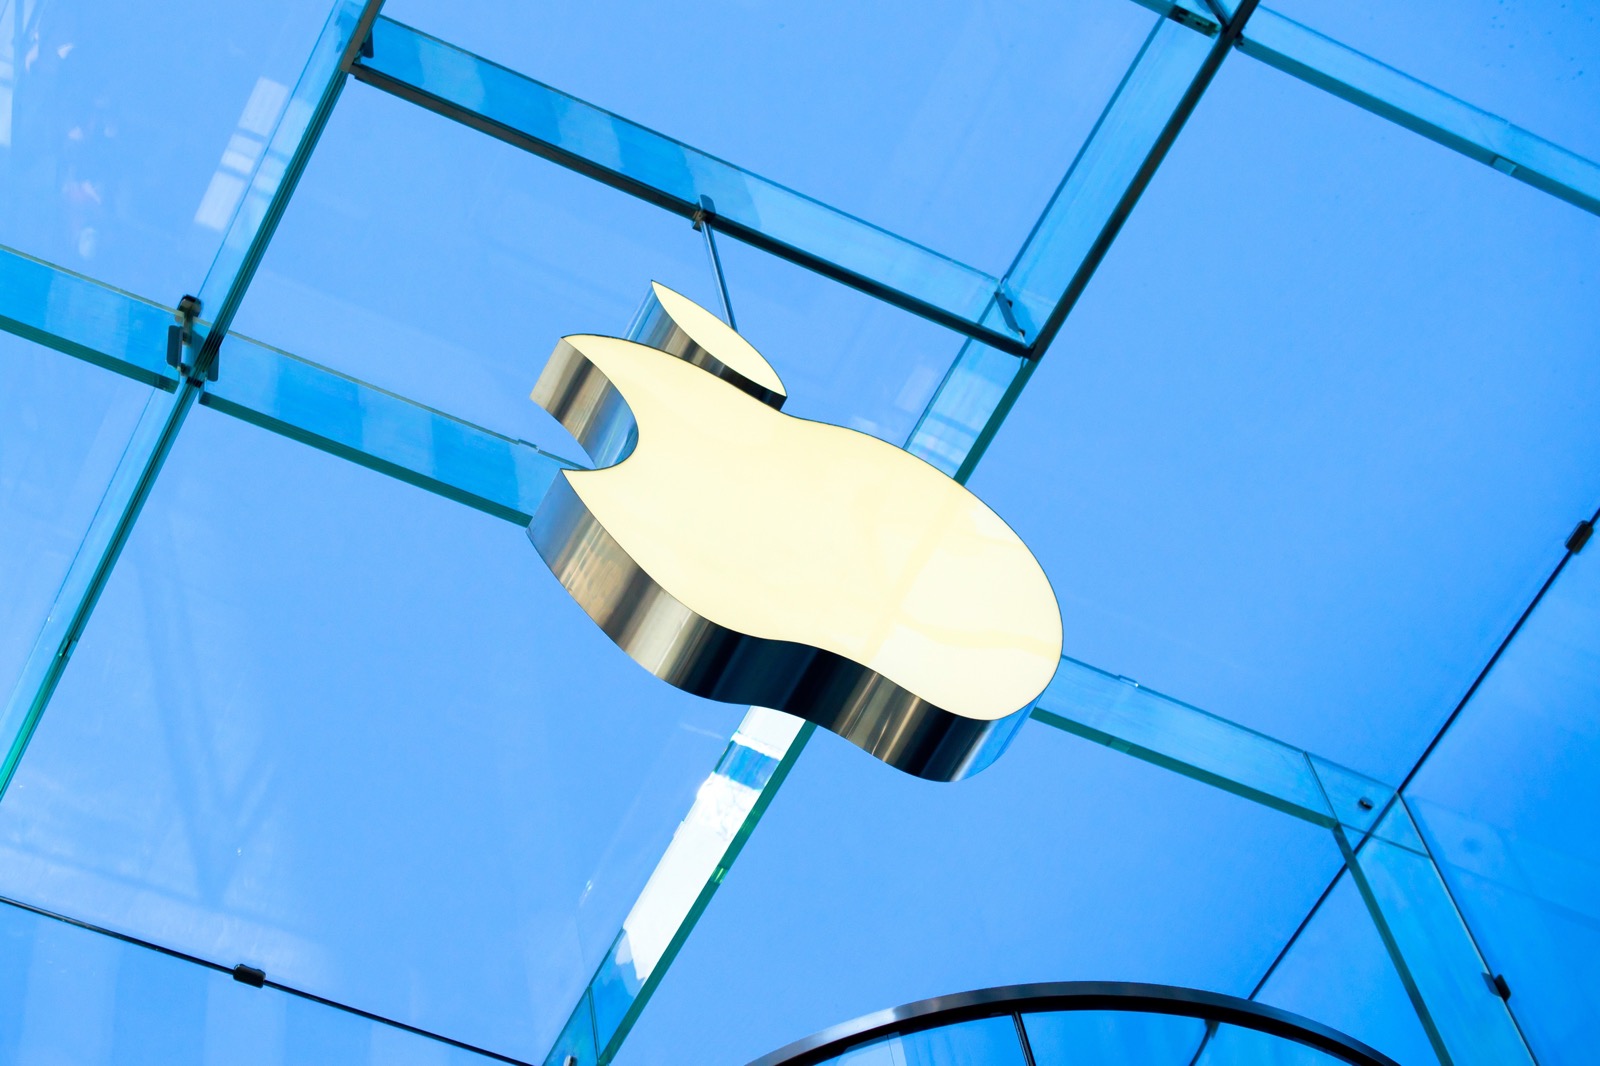 Apple is the most admired company in the world for the 12th consecutive year